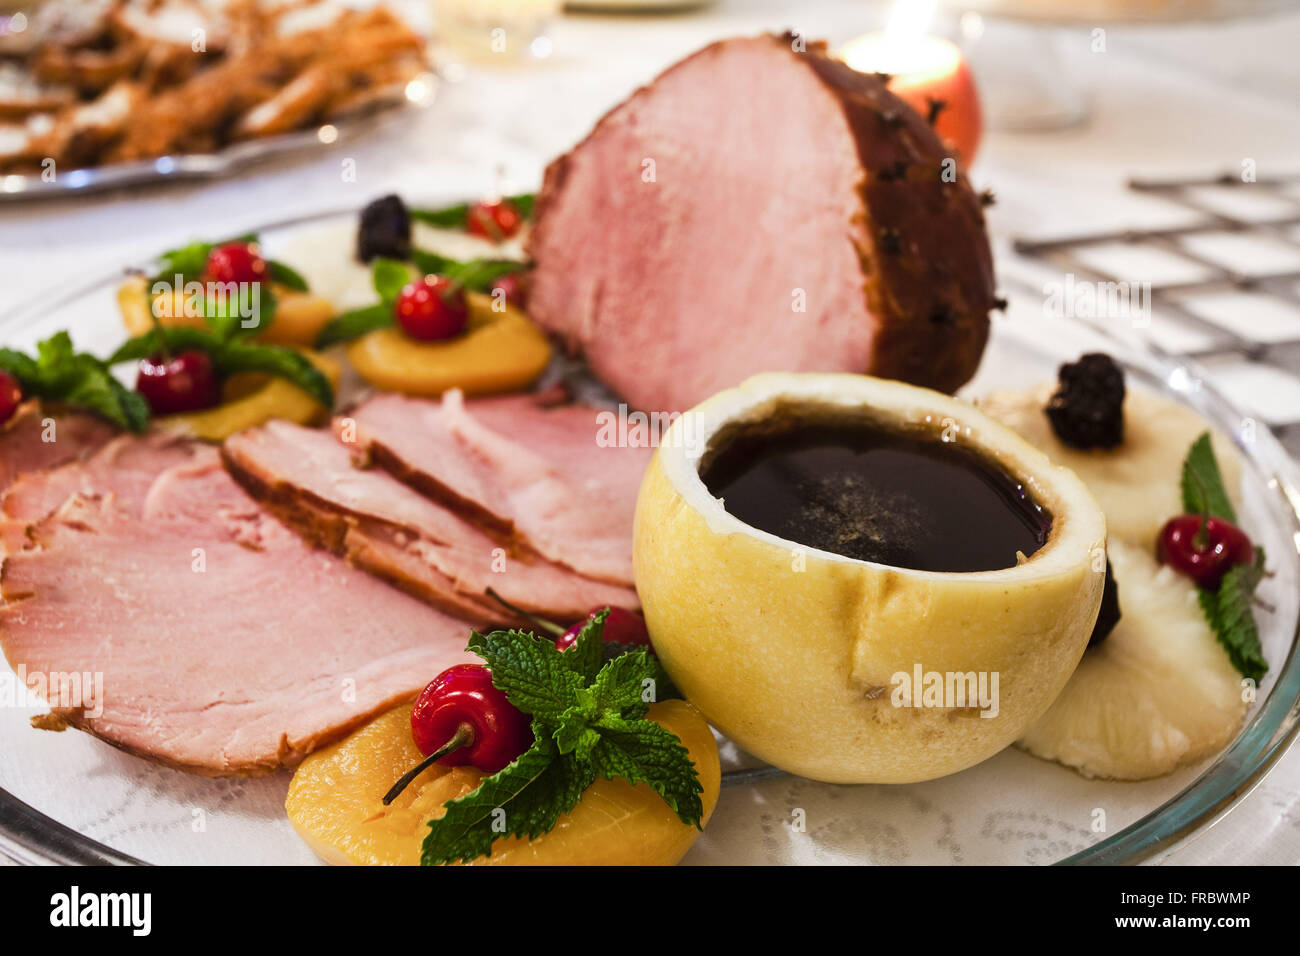 Tender - typical plate of Christmas dinner in middle-class housing Stock Photo